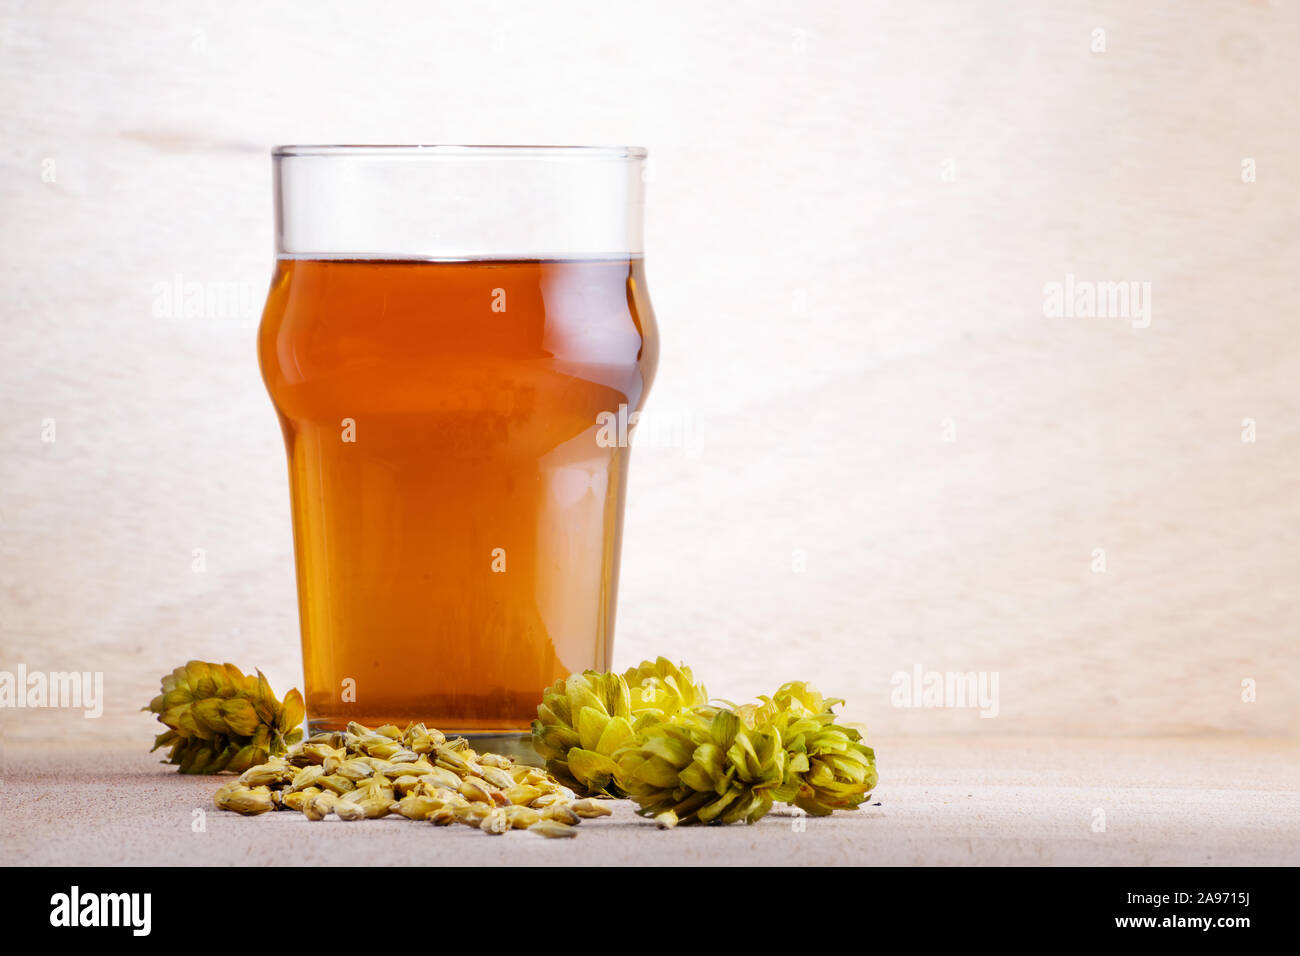 Beer in a glass with barley and hops on light wooden background. Craft beer, brewery and alcohol beverage concepts. Stock Photo